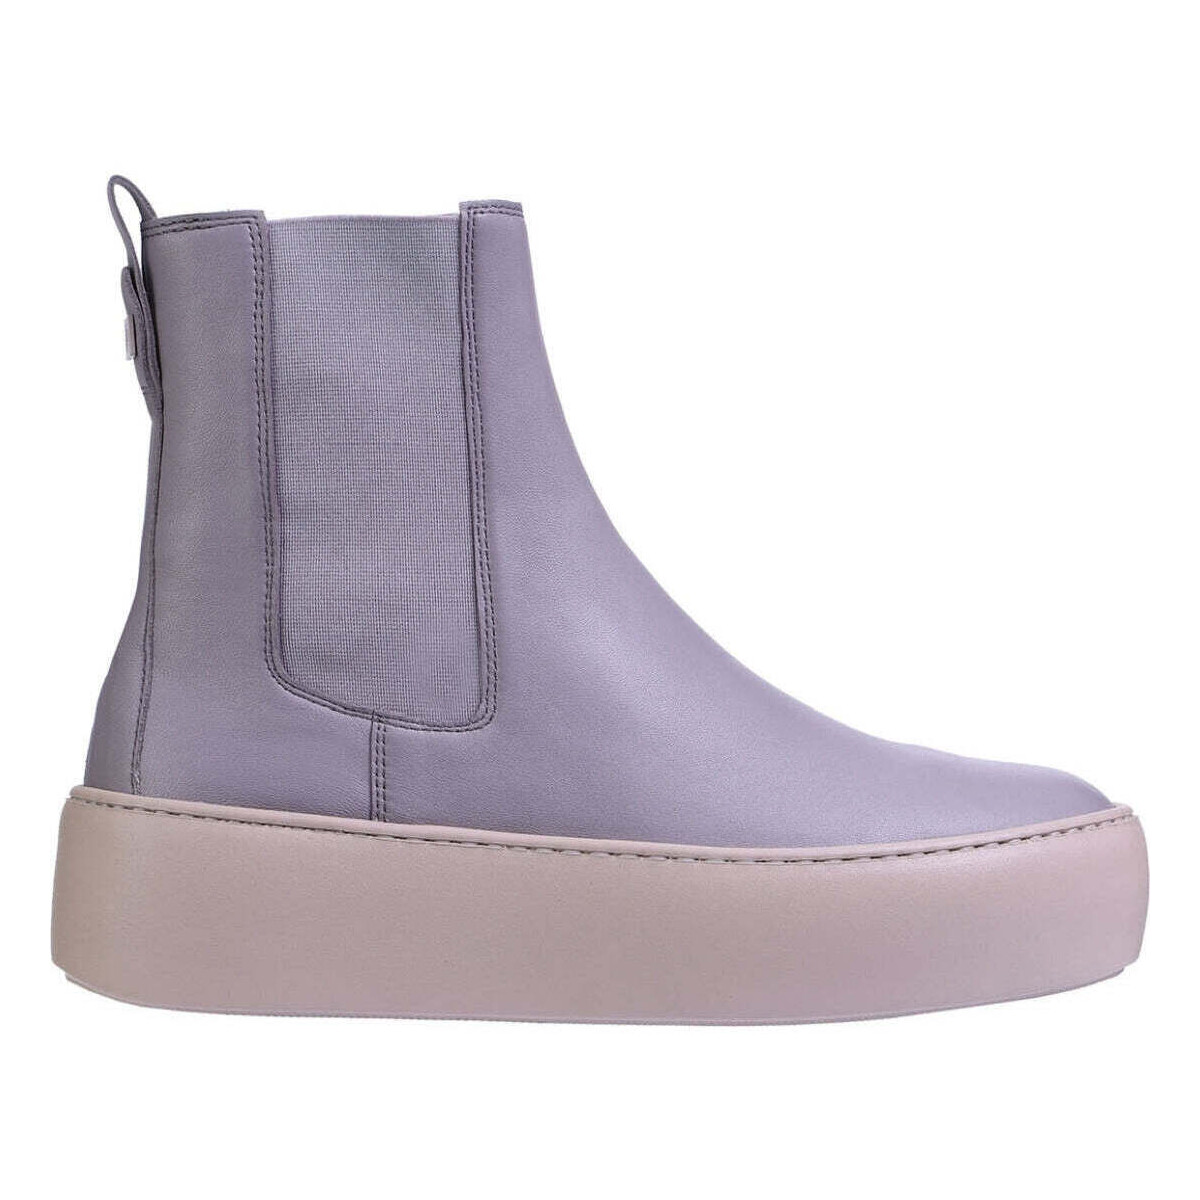 Chaussures Femme Bottines Högl connor booties Violet